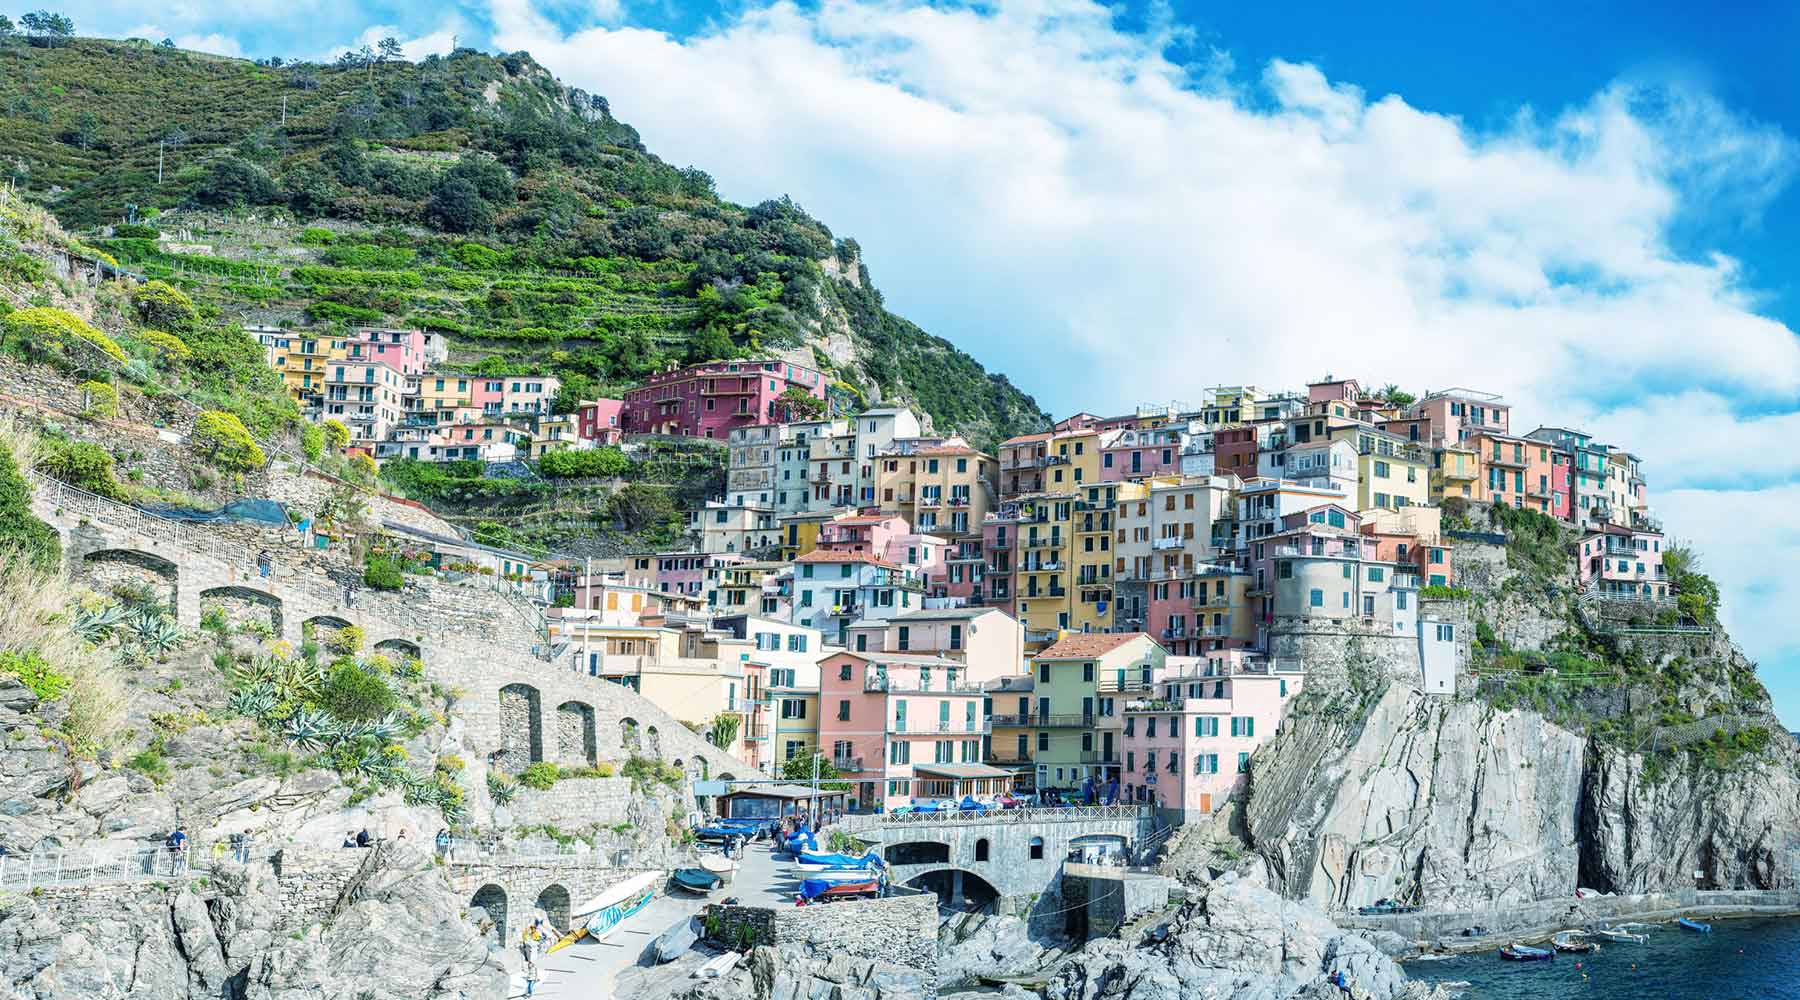 Cinque Terre and Sanremo: guide to the pearls of the Ligurian coast